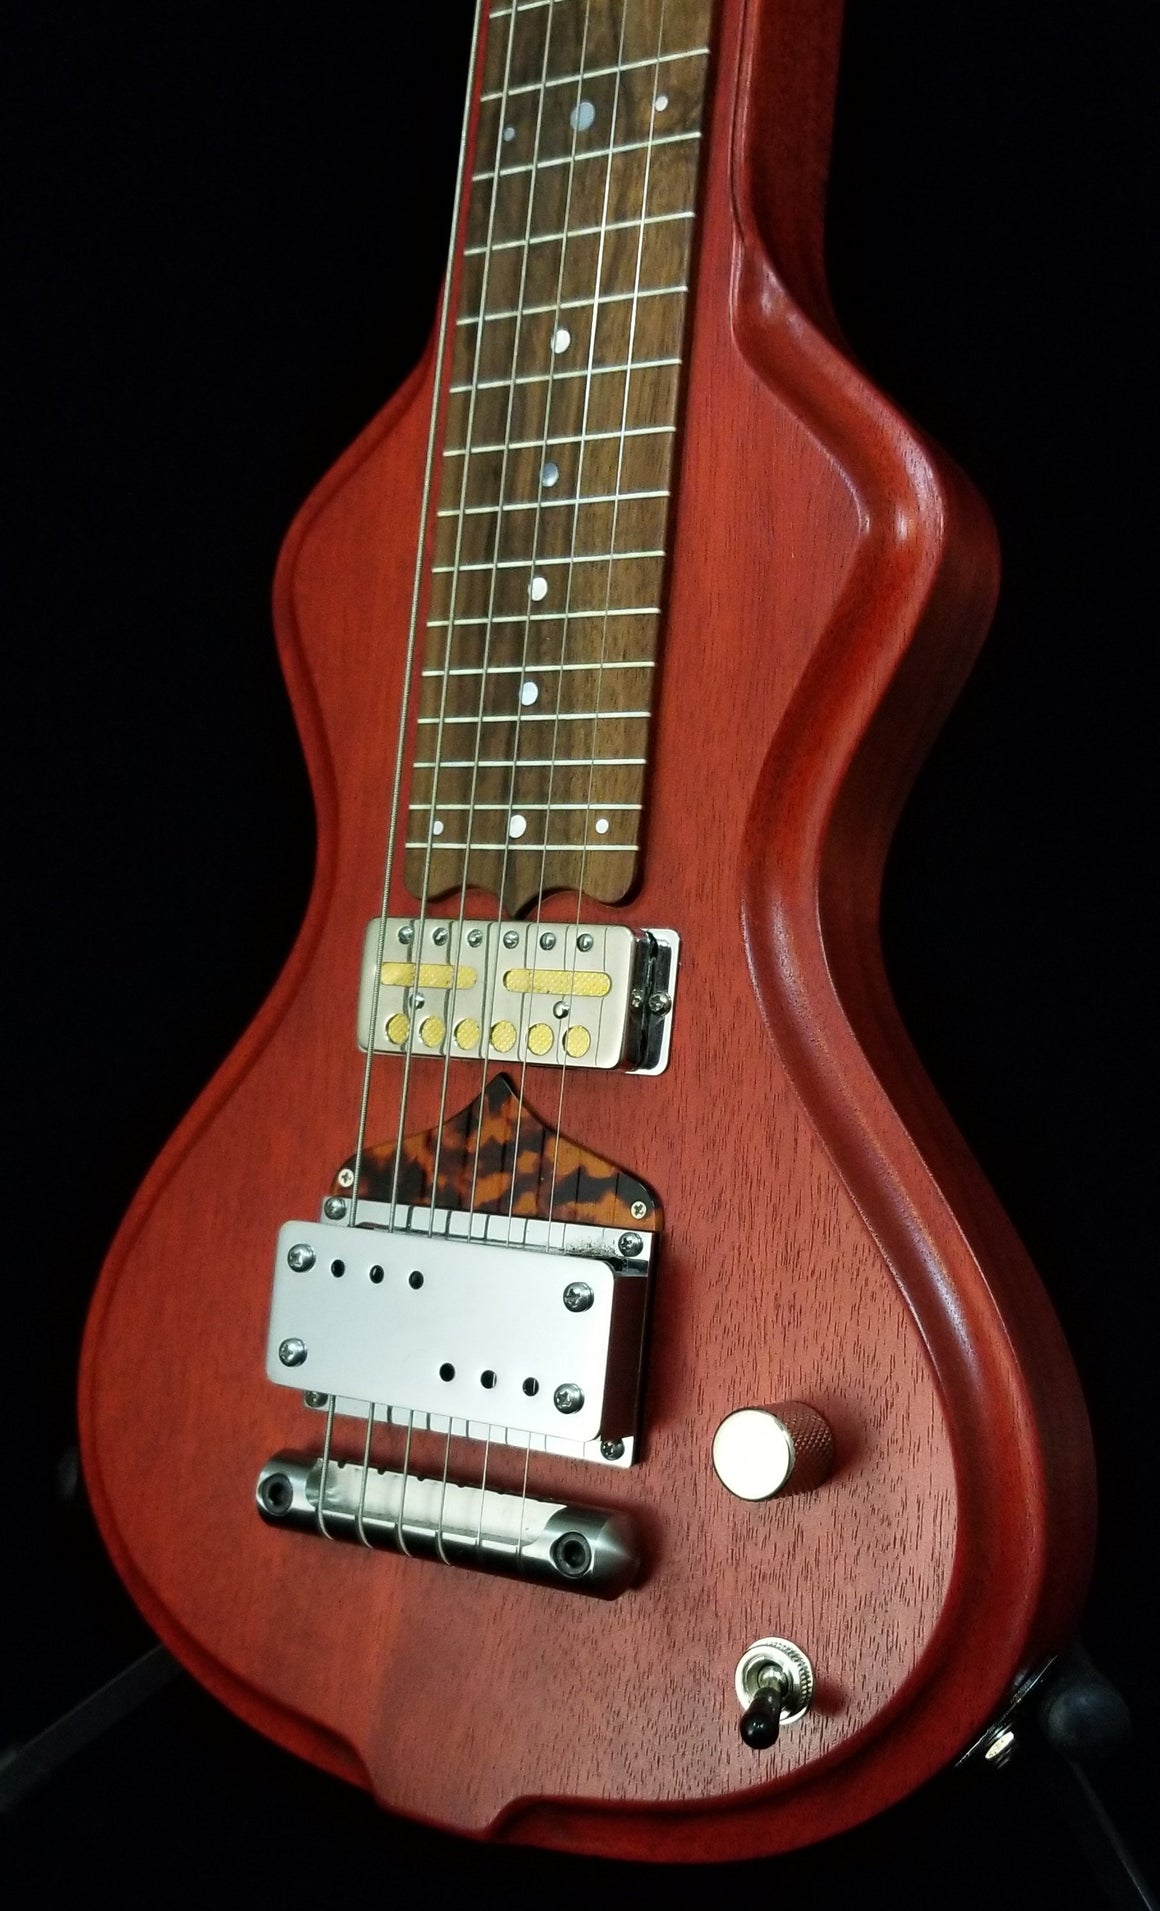 SOLD 2018 Electro Hawaiian Short Scale 6-String Lap Steel Played by Greg Leisz, #1068